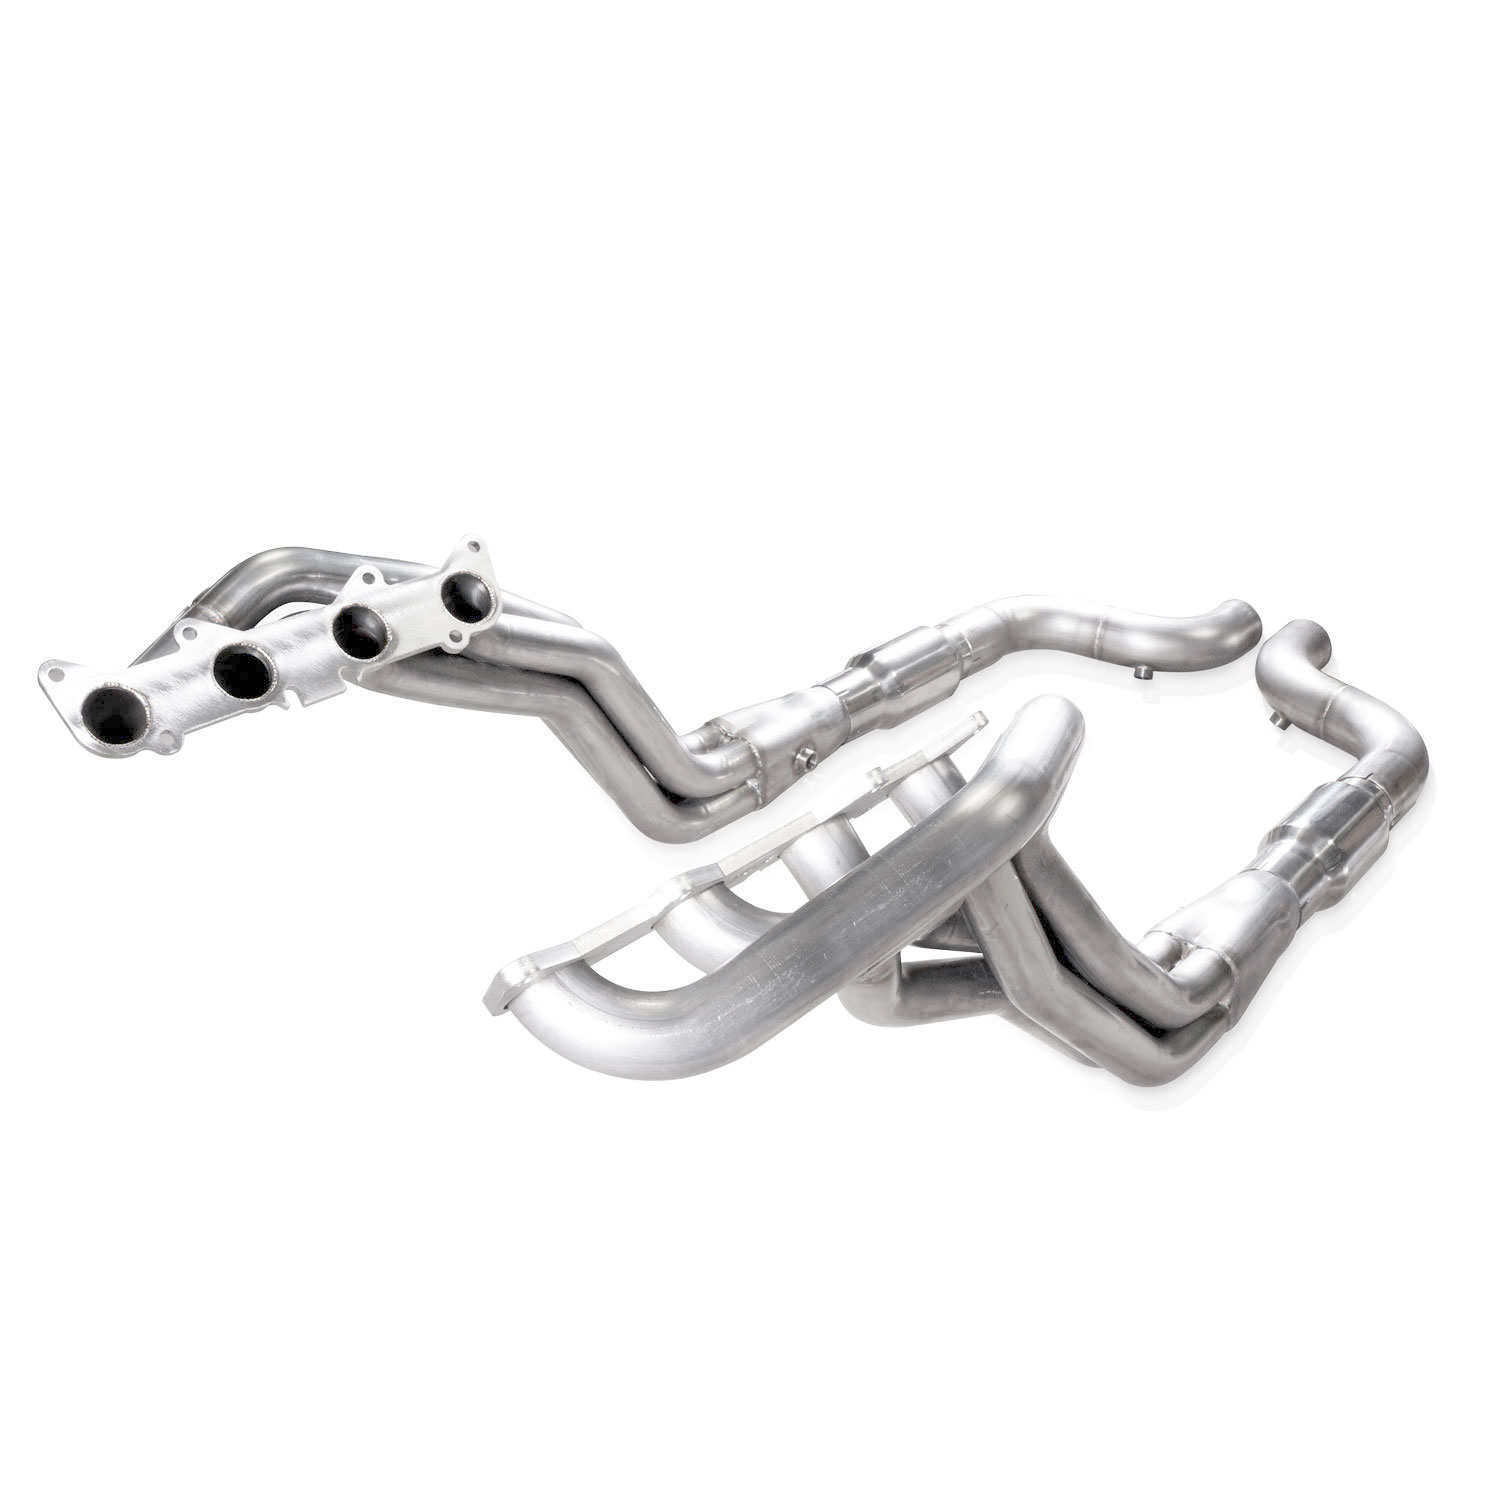 2015-2021 Mustang GT 5.0L Stainless Power Headers 1-7/8" With Catted Leads Performance Connect